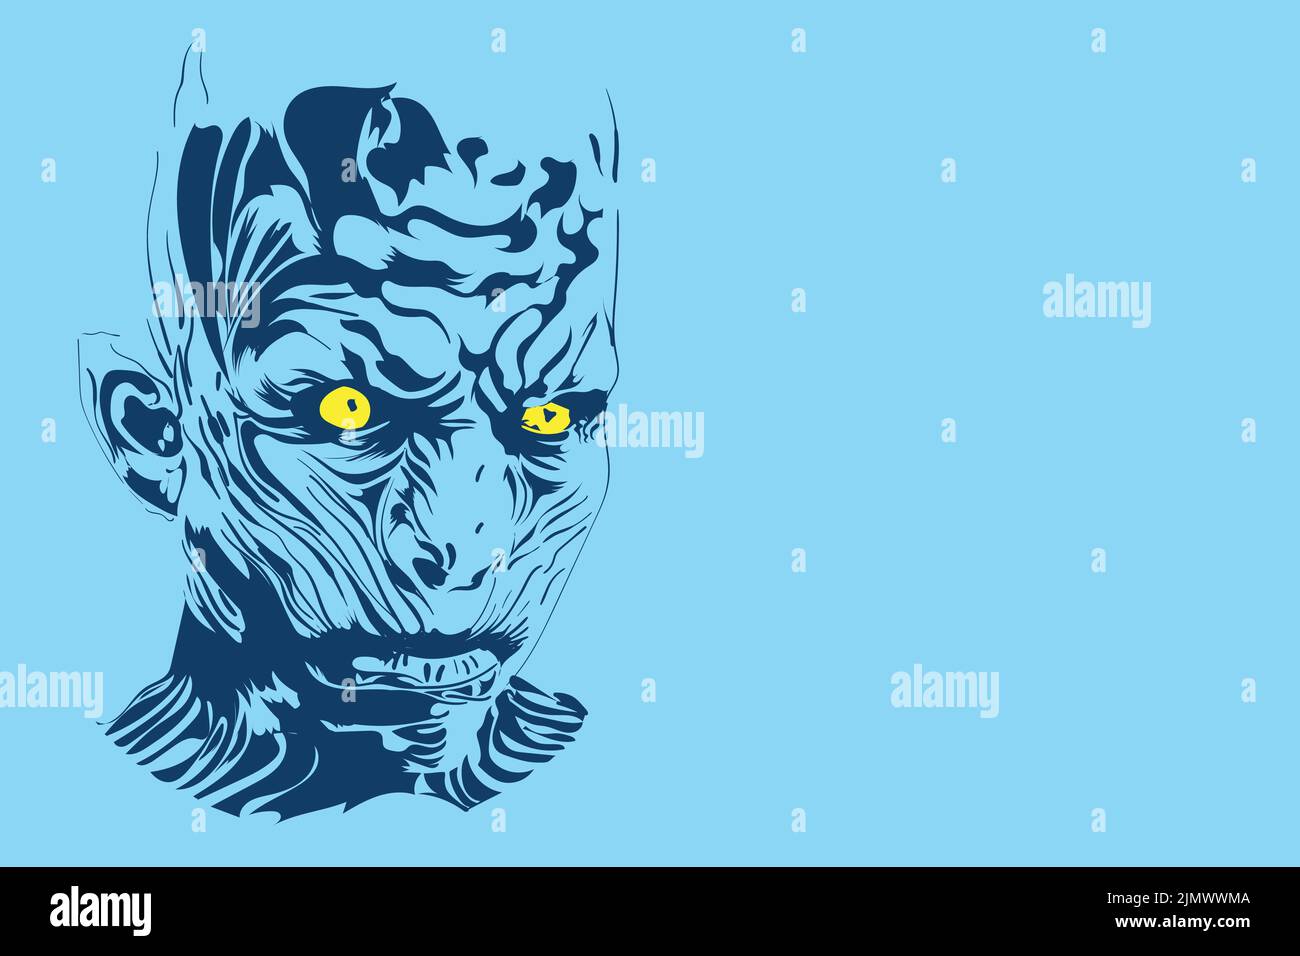 The glowing eyes of an imaginary monster vector illustration Stock Vector